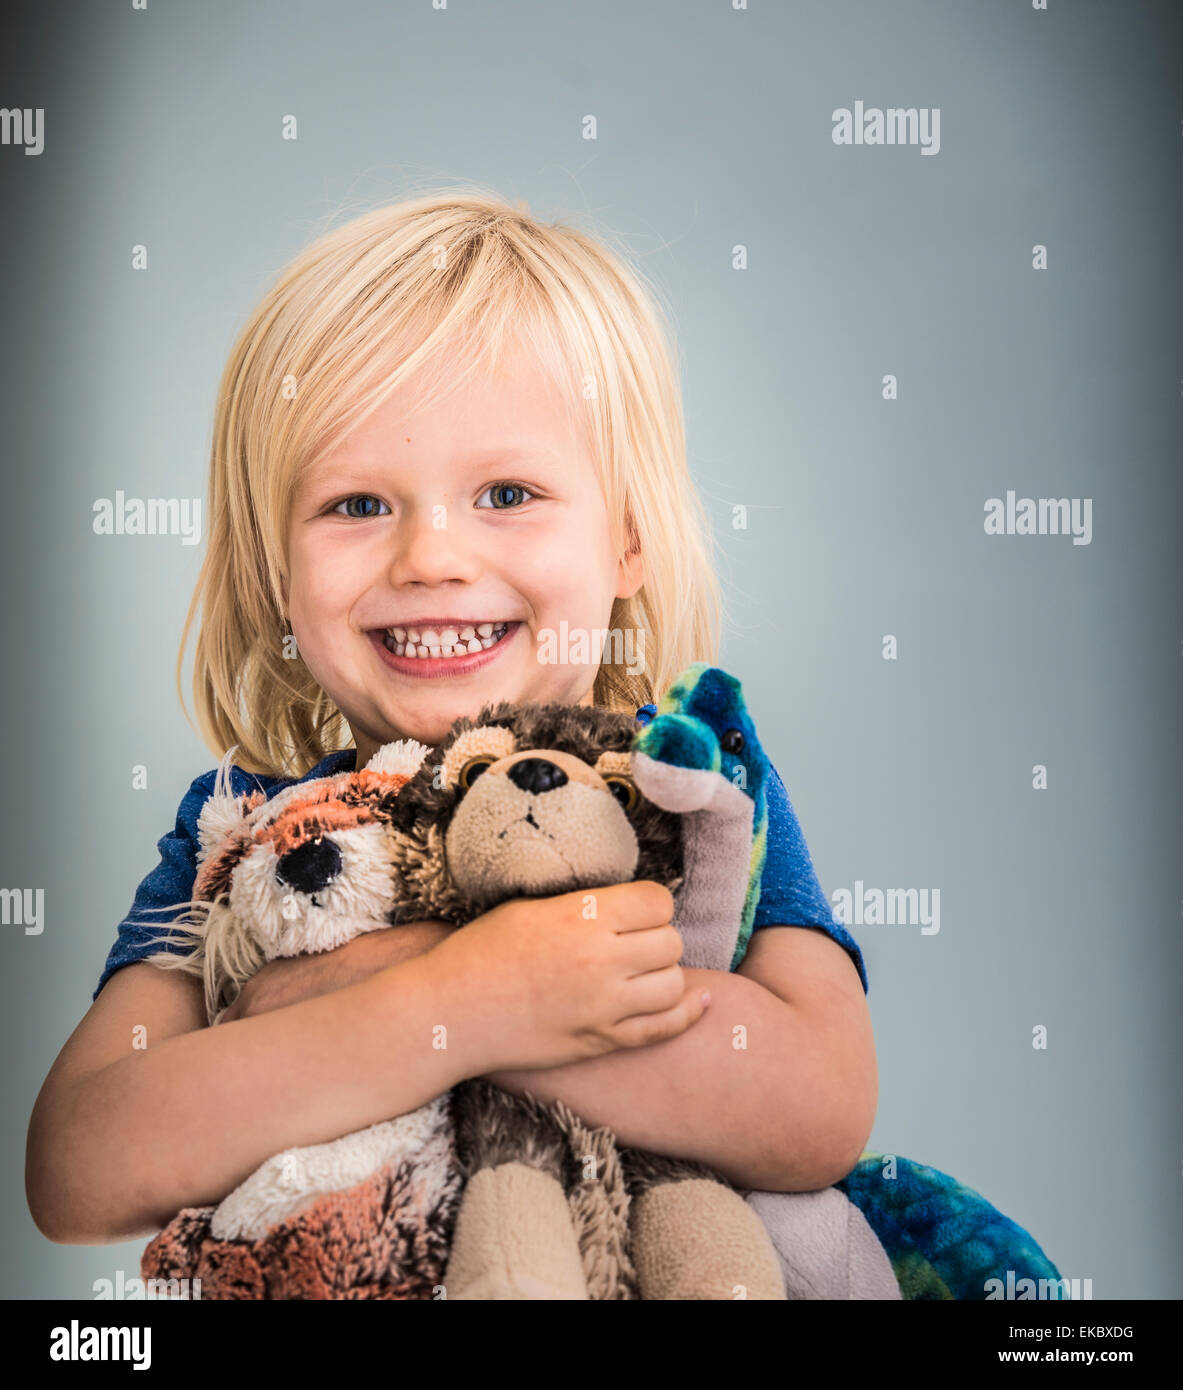 Portrait of young boy holding cuddly toys Stock Photo